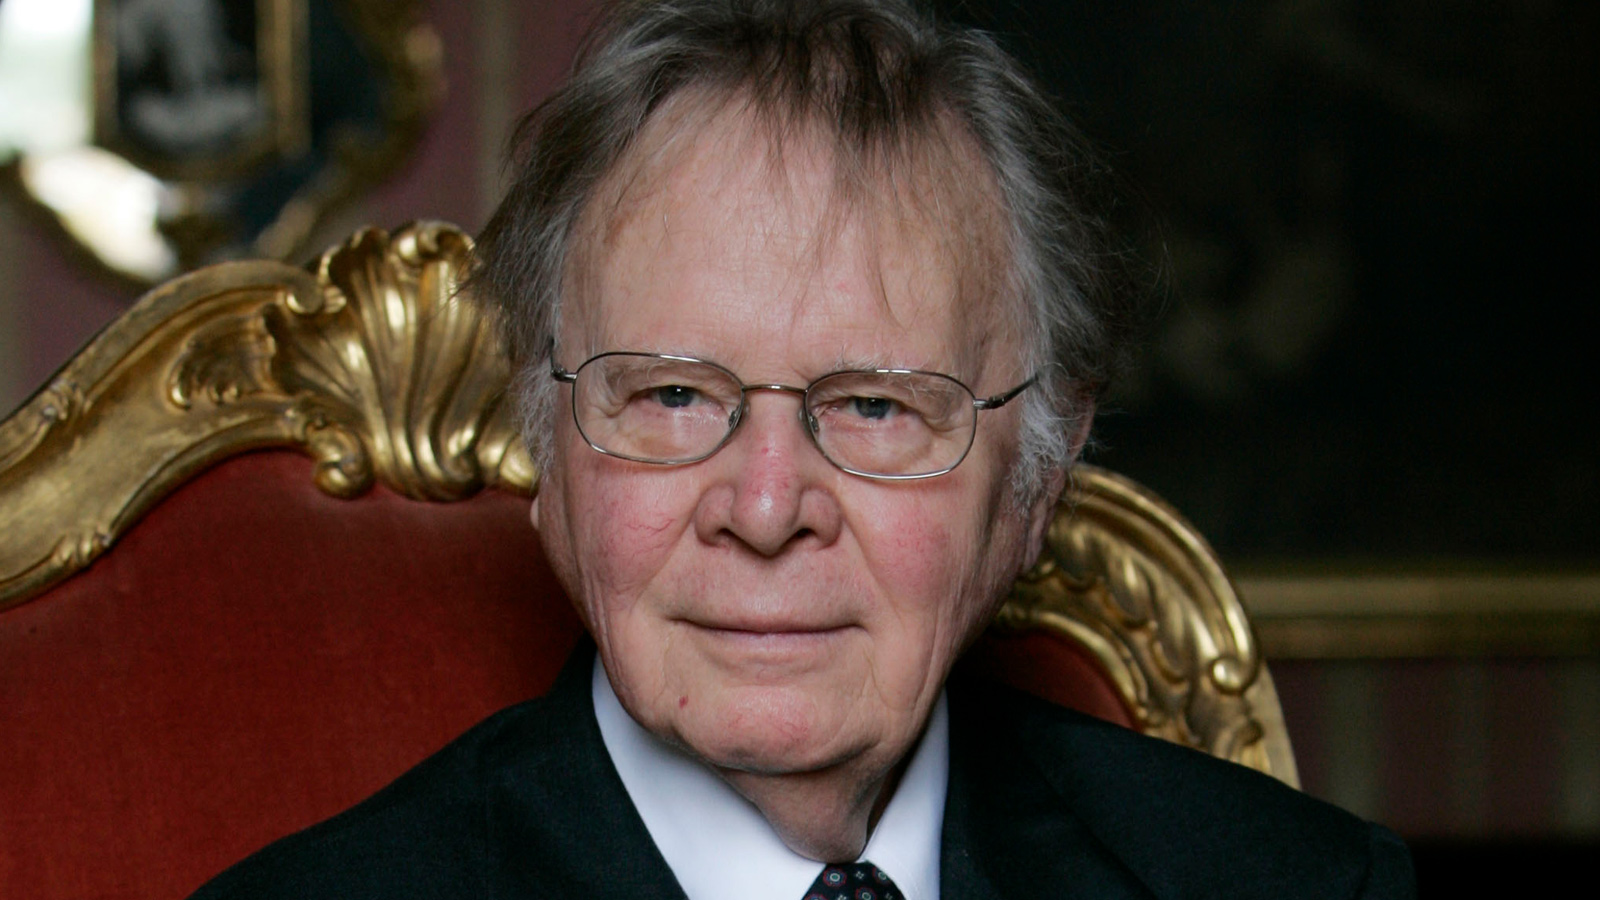 A 2008 photo of Wallace Smith Broecker, a professor in the Department of Earth and Environmental Sciences at Columbia University in New York, addressing the audience during the Balzan prize ceremony in Rome.